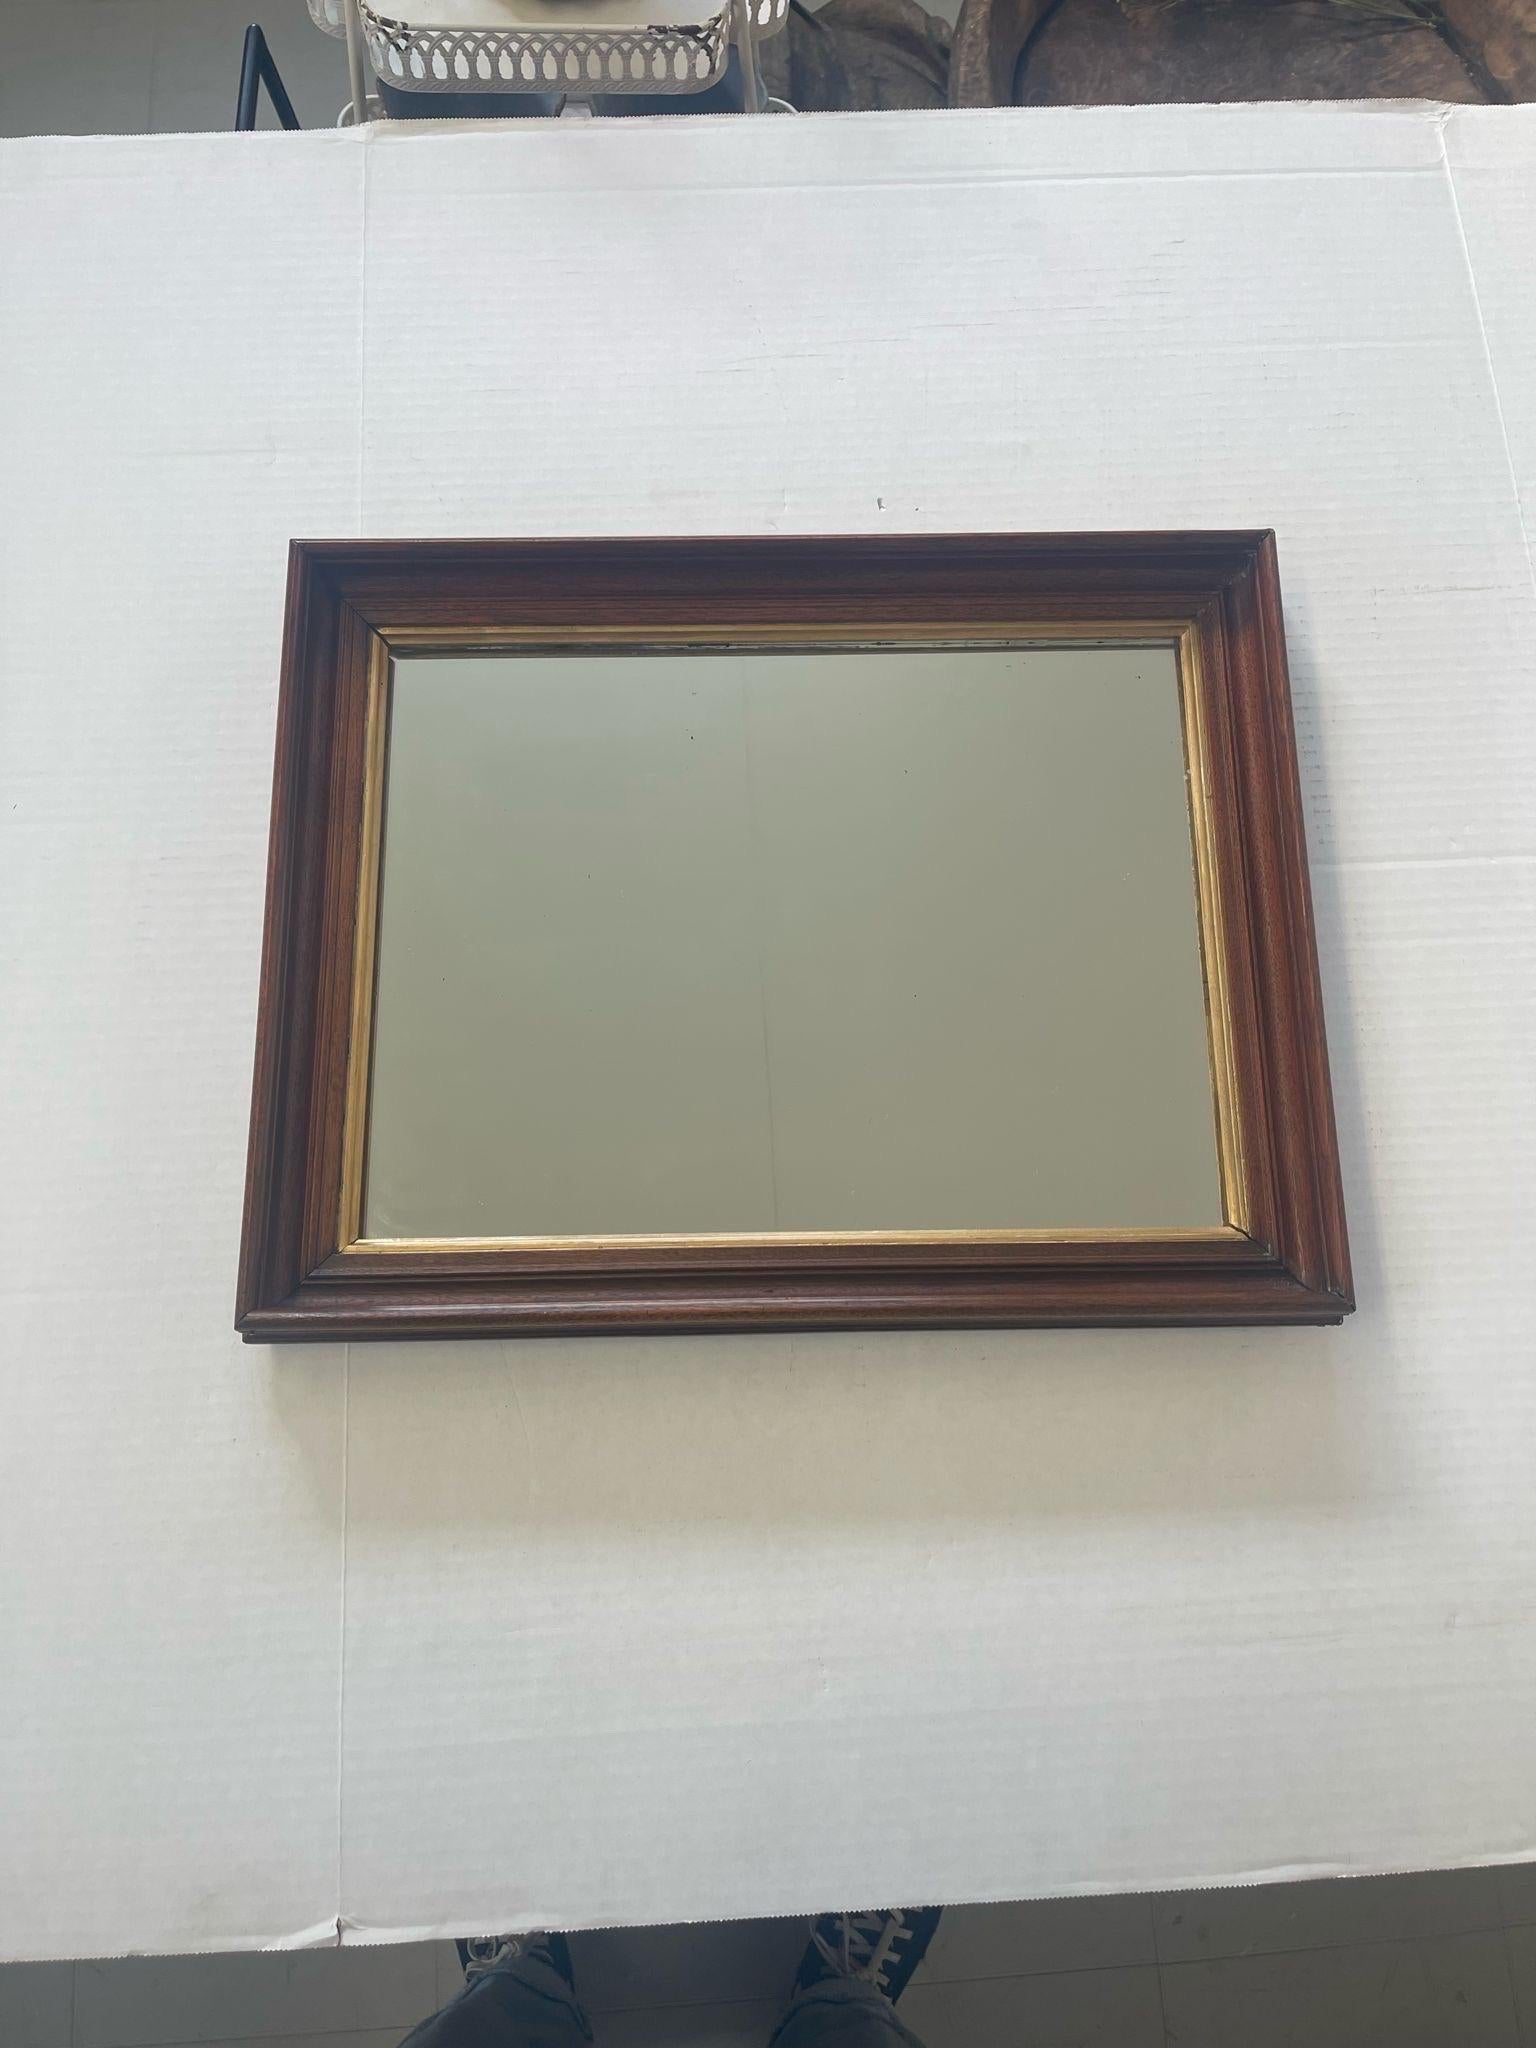 The beveled wood frame on this piece has gold toned accents. Slight Petina to the end of the glass. Vintage Condition Consistent with Age as Pictured.

Dimensions. 15 W ; 1 D ; 21 H